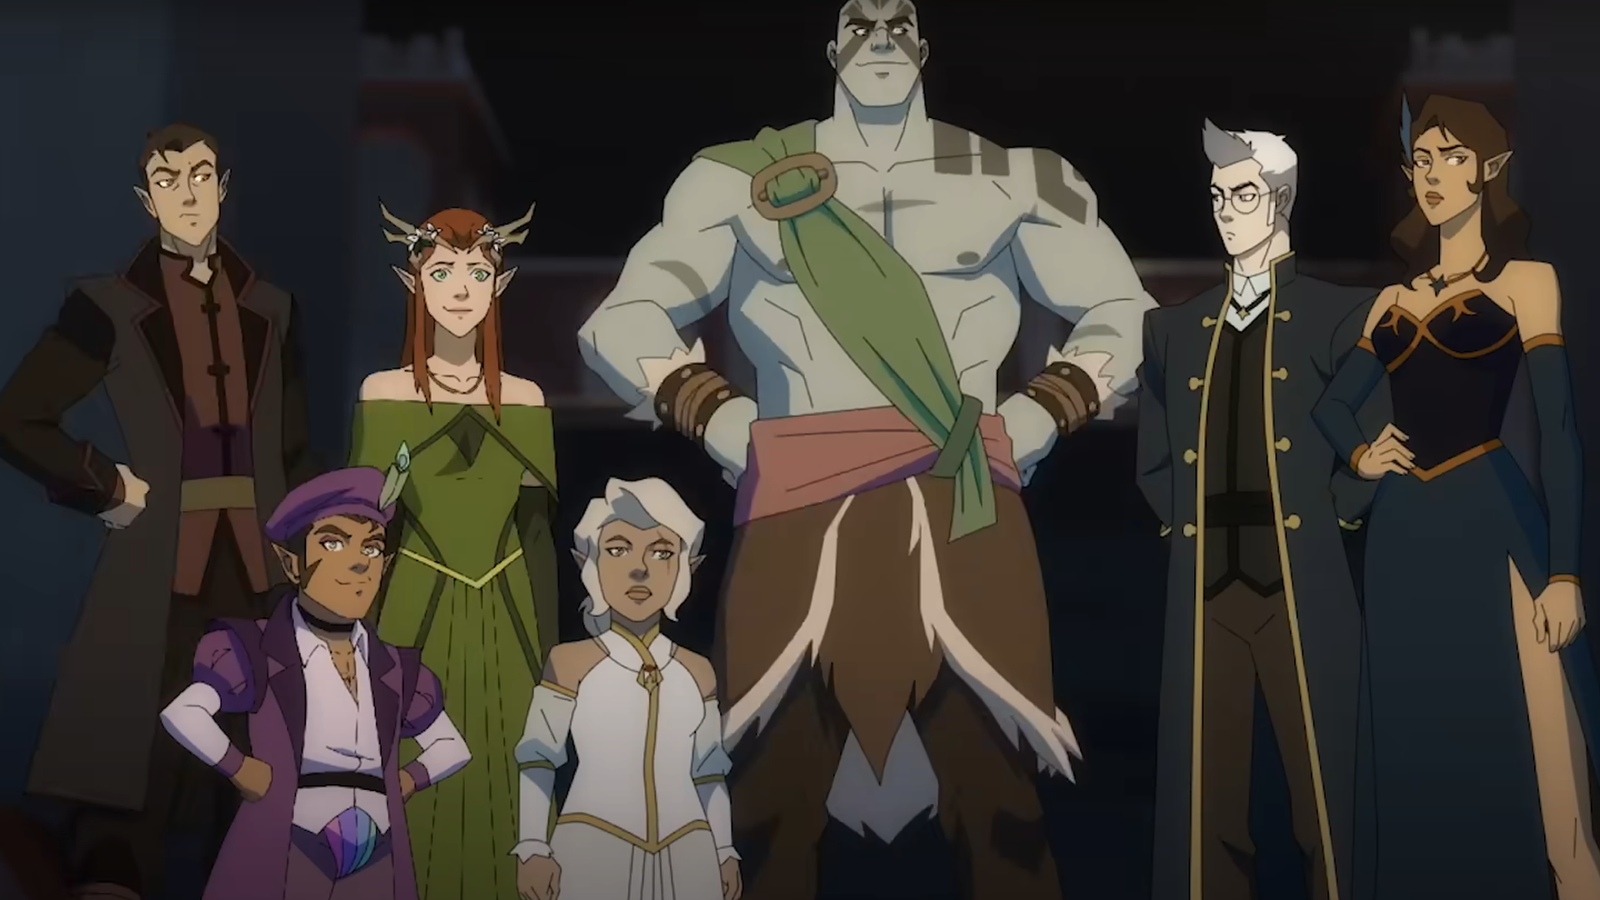 The Legend of Vox Machina season 3: Everything you need to know